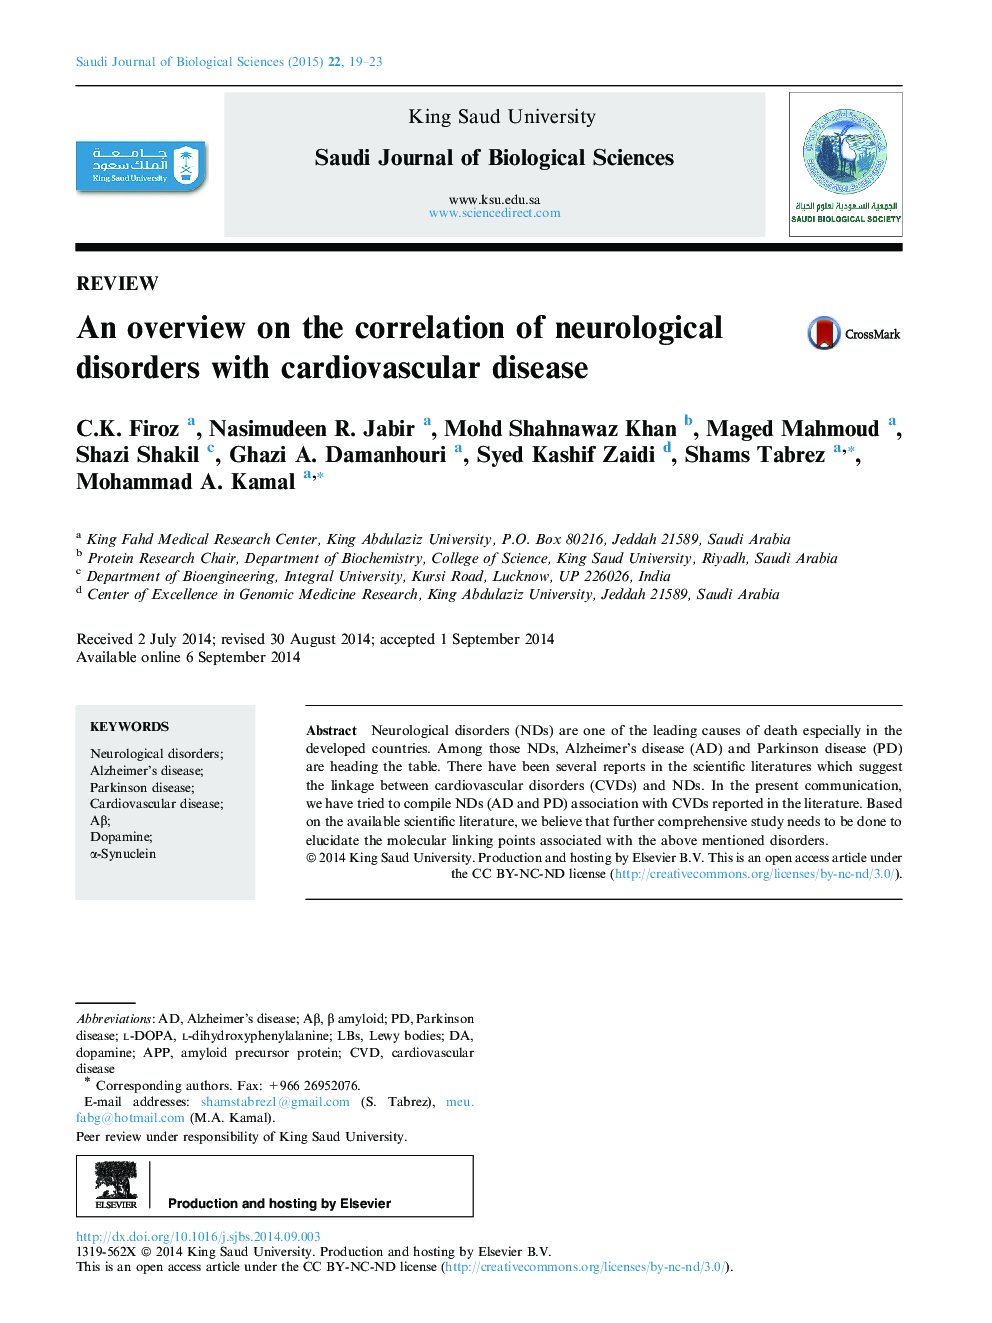 An overview on the correlation of neurological disorders with cardiovascular disease 